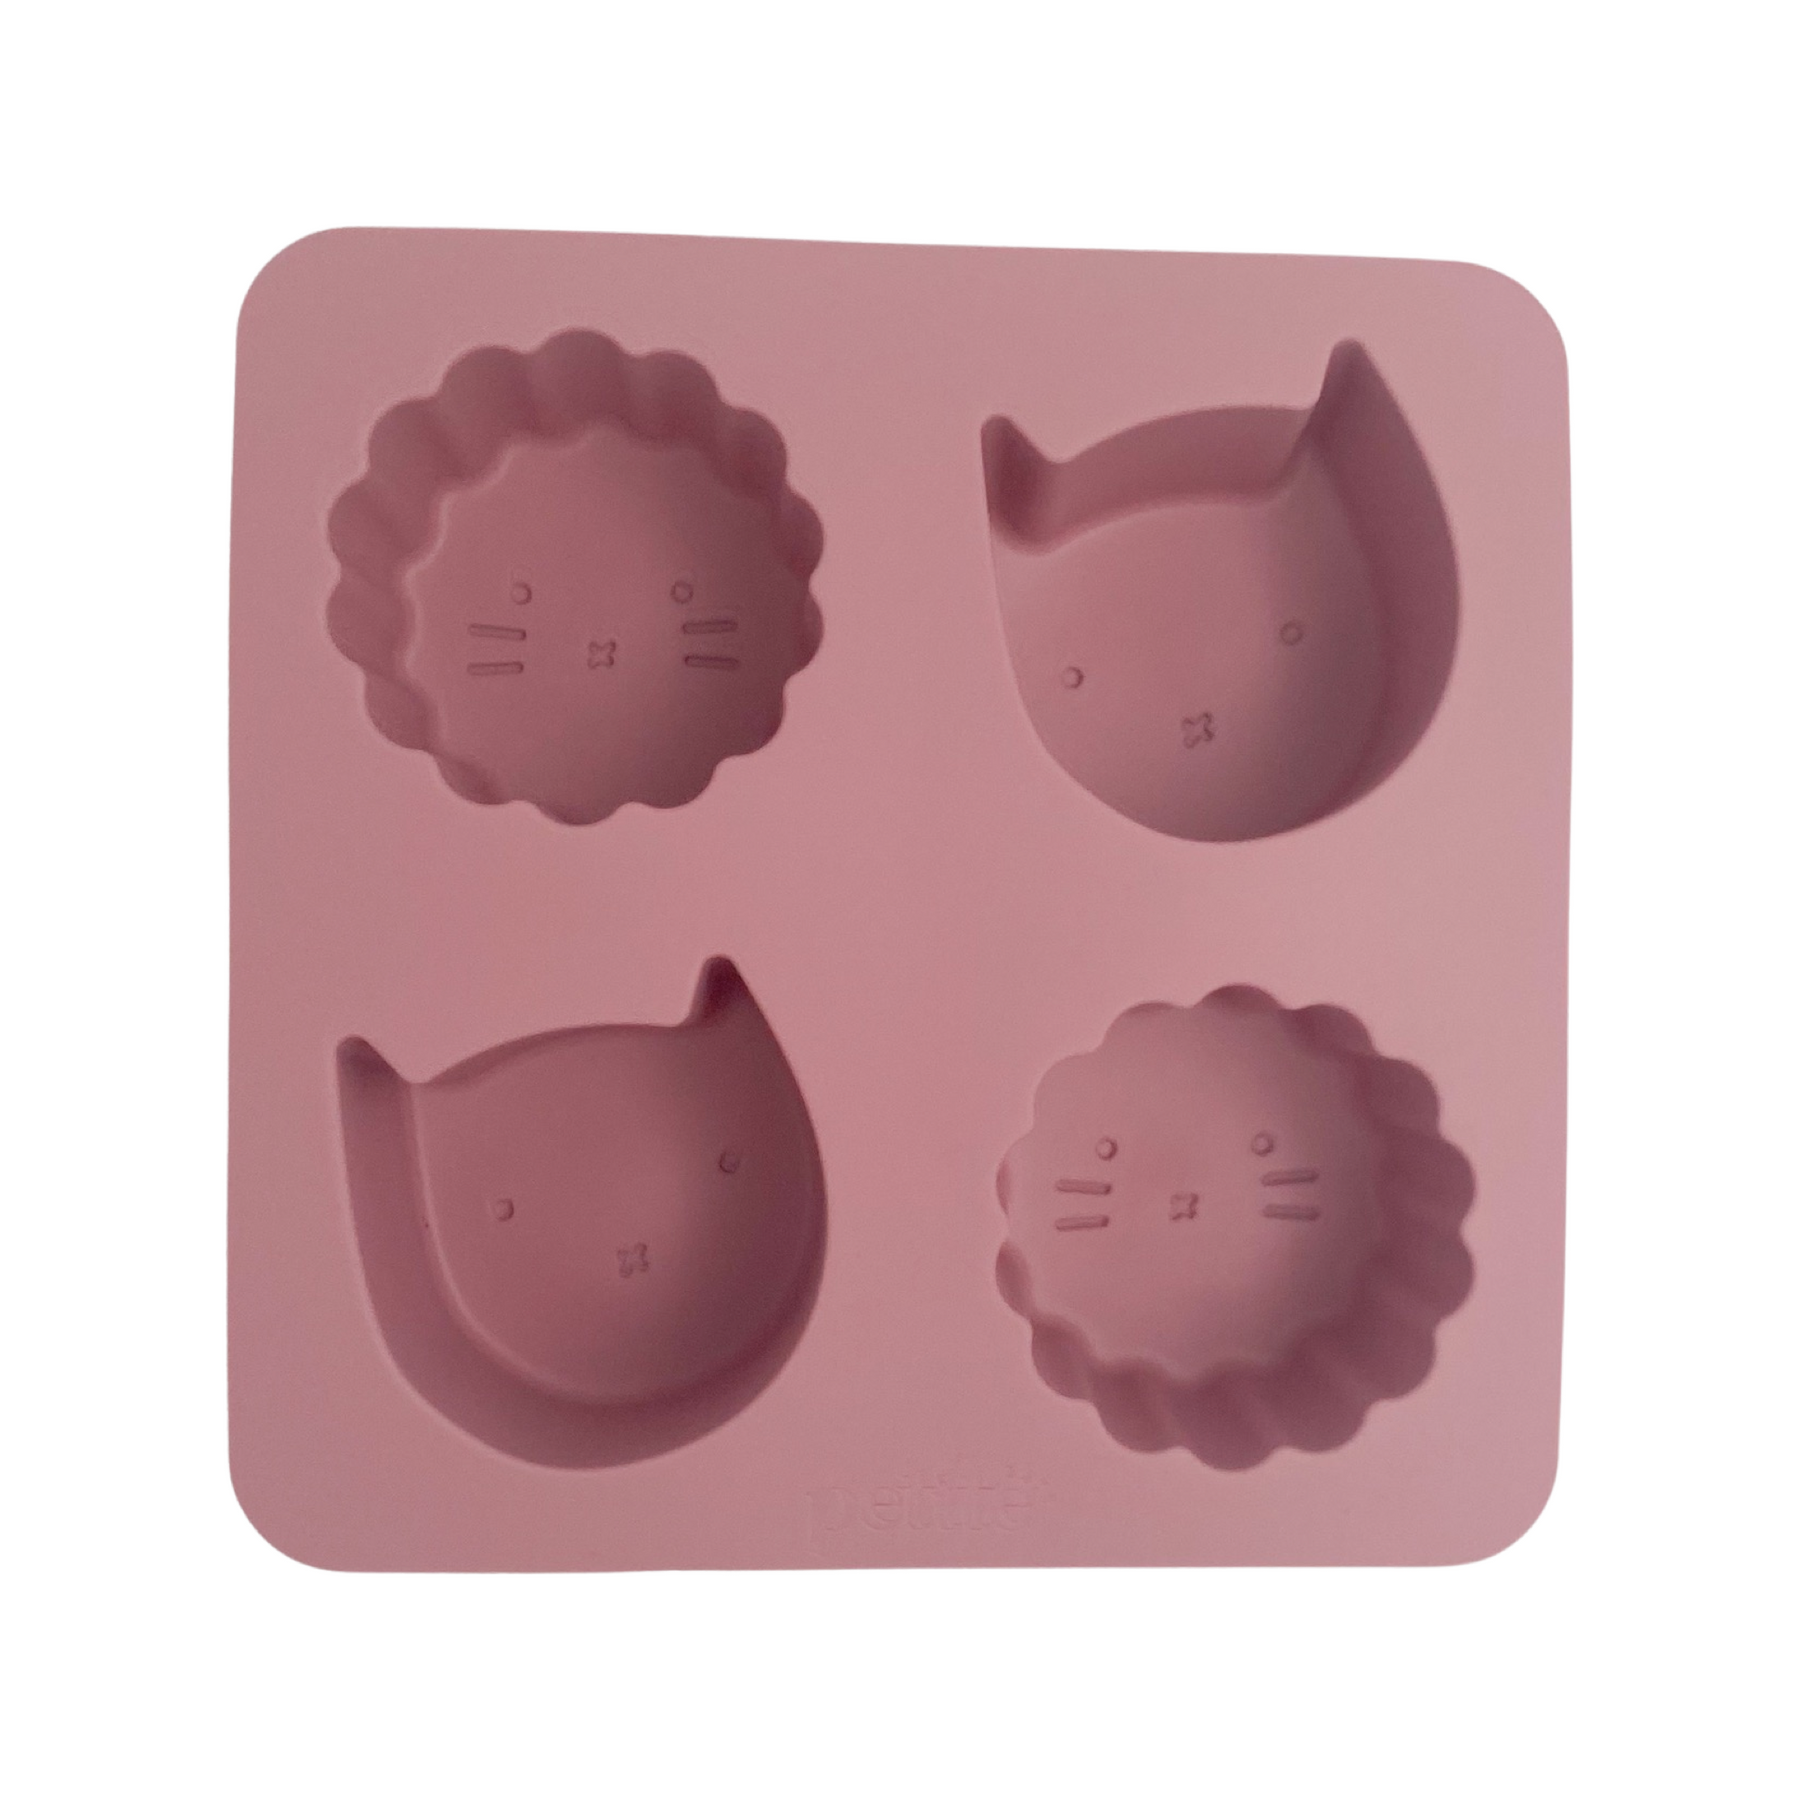 Silicone Baking Mould